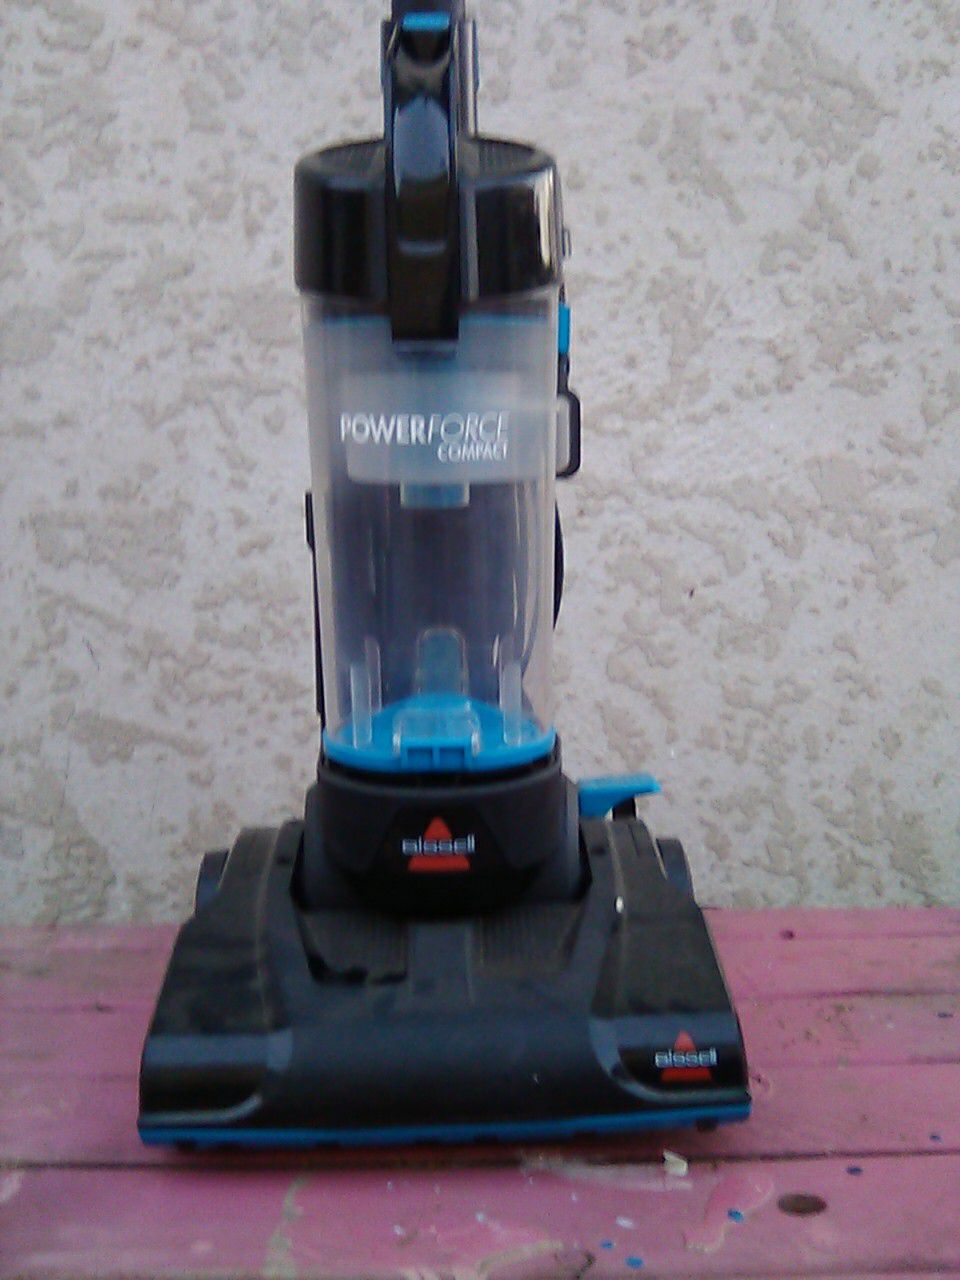 Bissell Power force